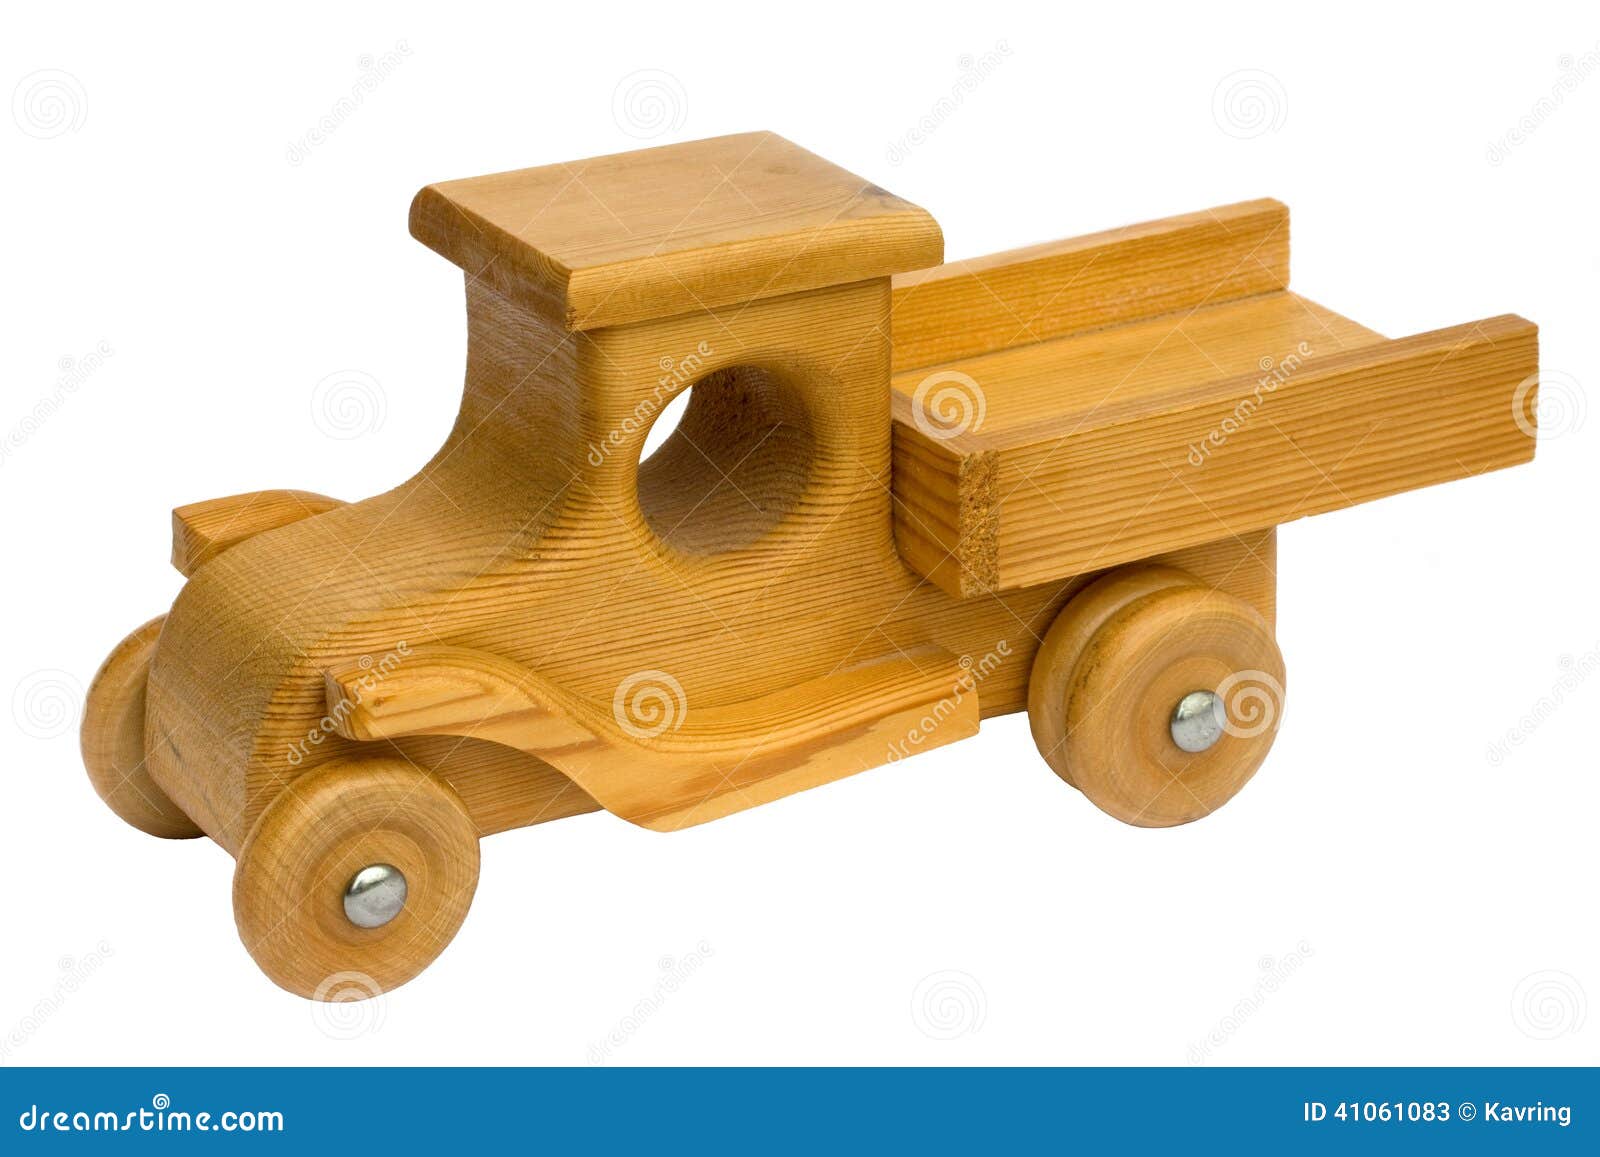 Wooden Toy Truck Stock Photo - Image: 41061083